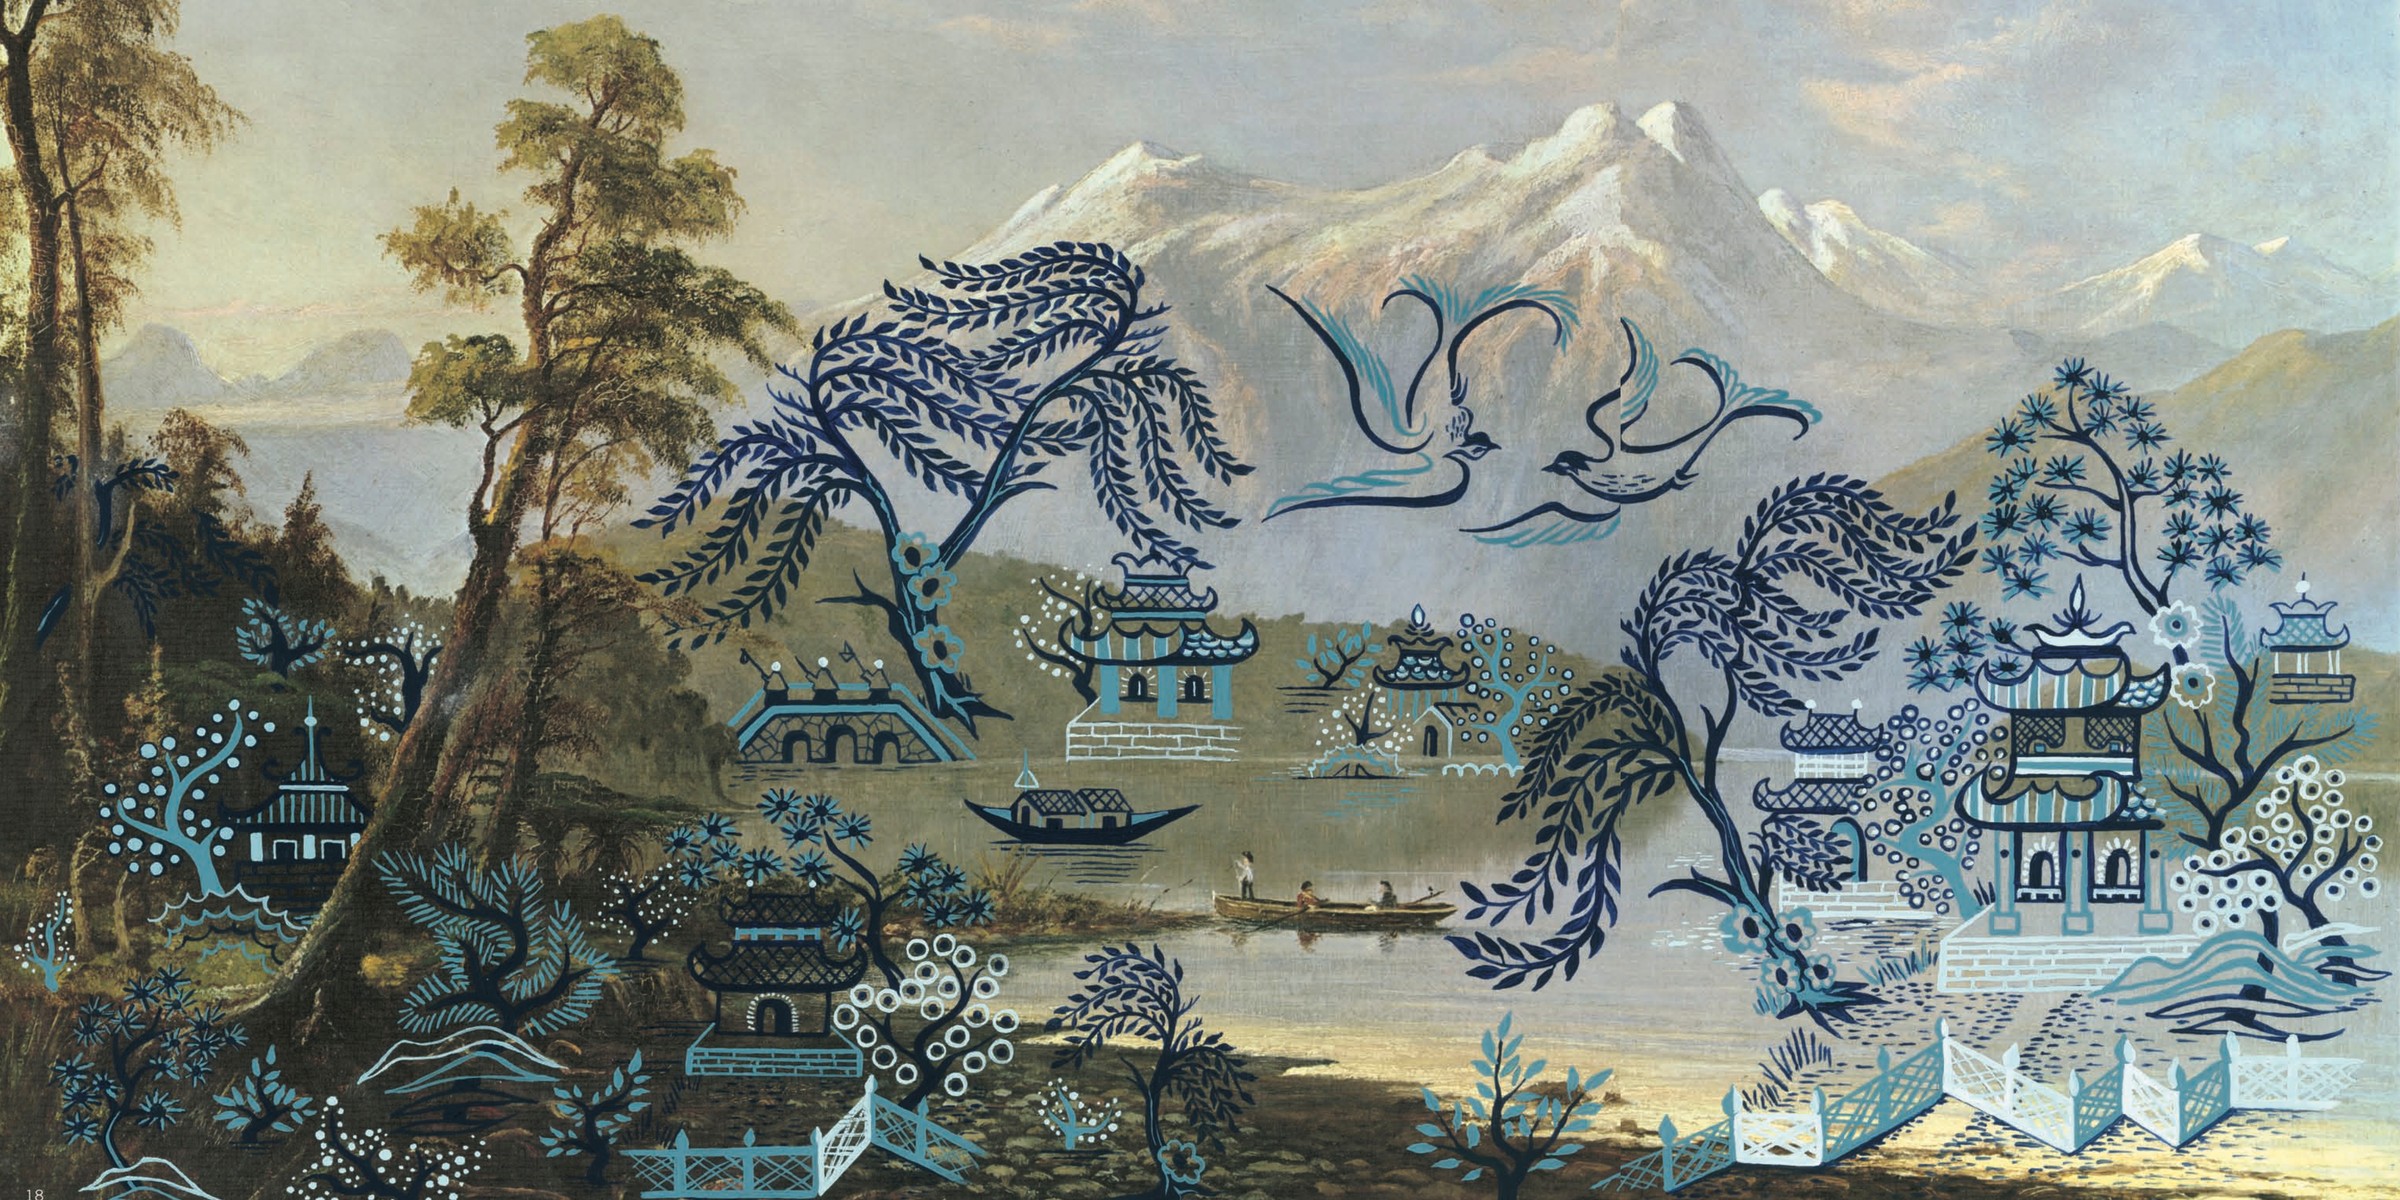 Blue and white willow patterns showing birds, trees and pagoda have been painted over a colonial painting of a New Zealand landscape.